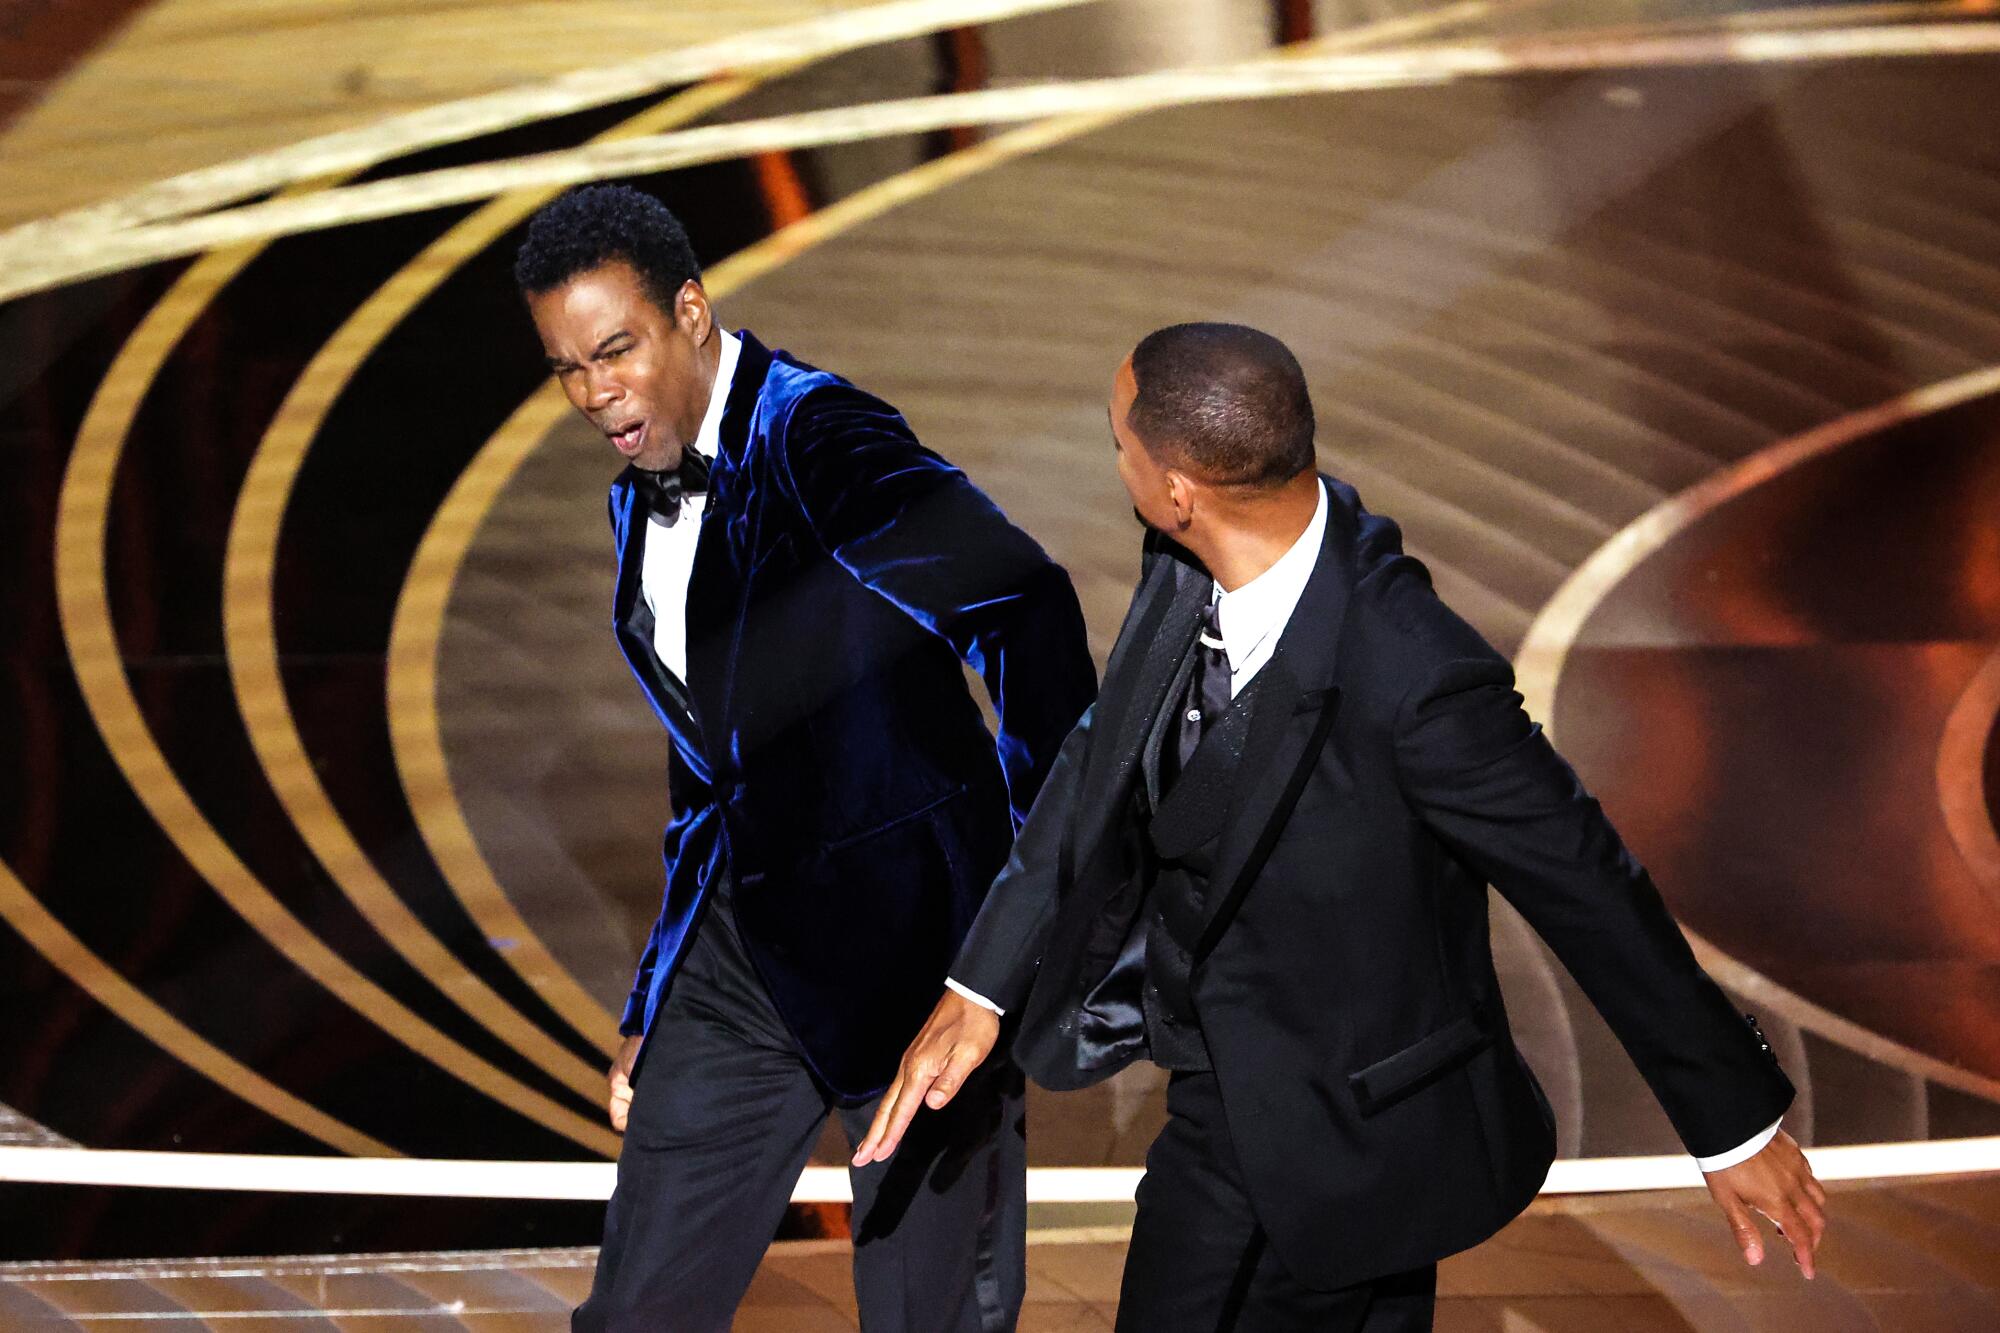 Will Smith slaps Chris Rock onstage during the 94th Academy Awards at the Dolby Theatre.